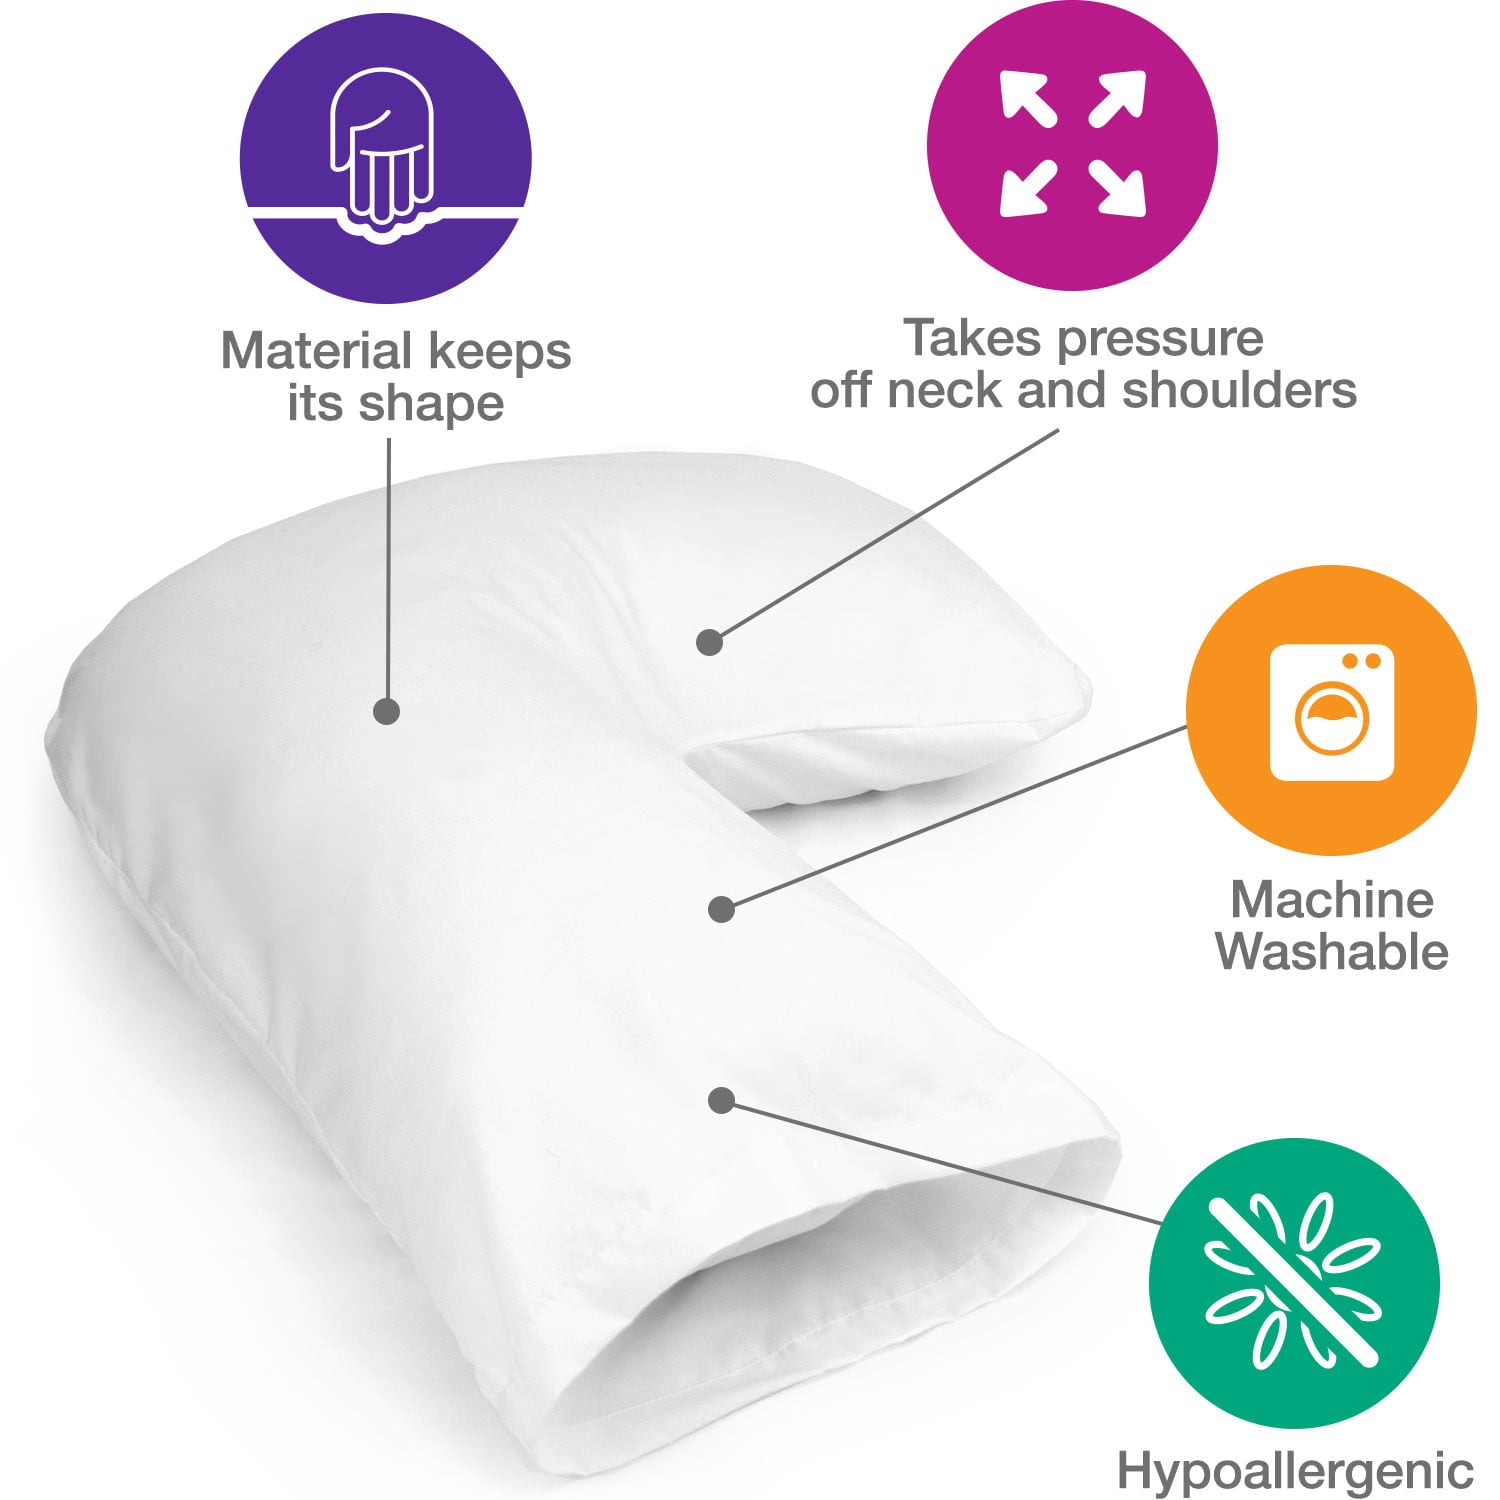 DMI U Shaped Polyester Contour Body Pillow Great for Side Sleeping, Neck Pain, Cervical Support & Pregnancy, Hypoallergenic With Machine Washable Cover